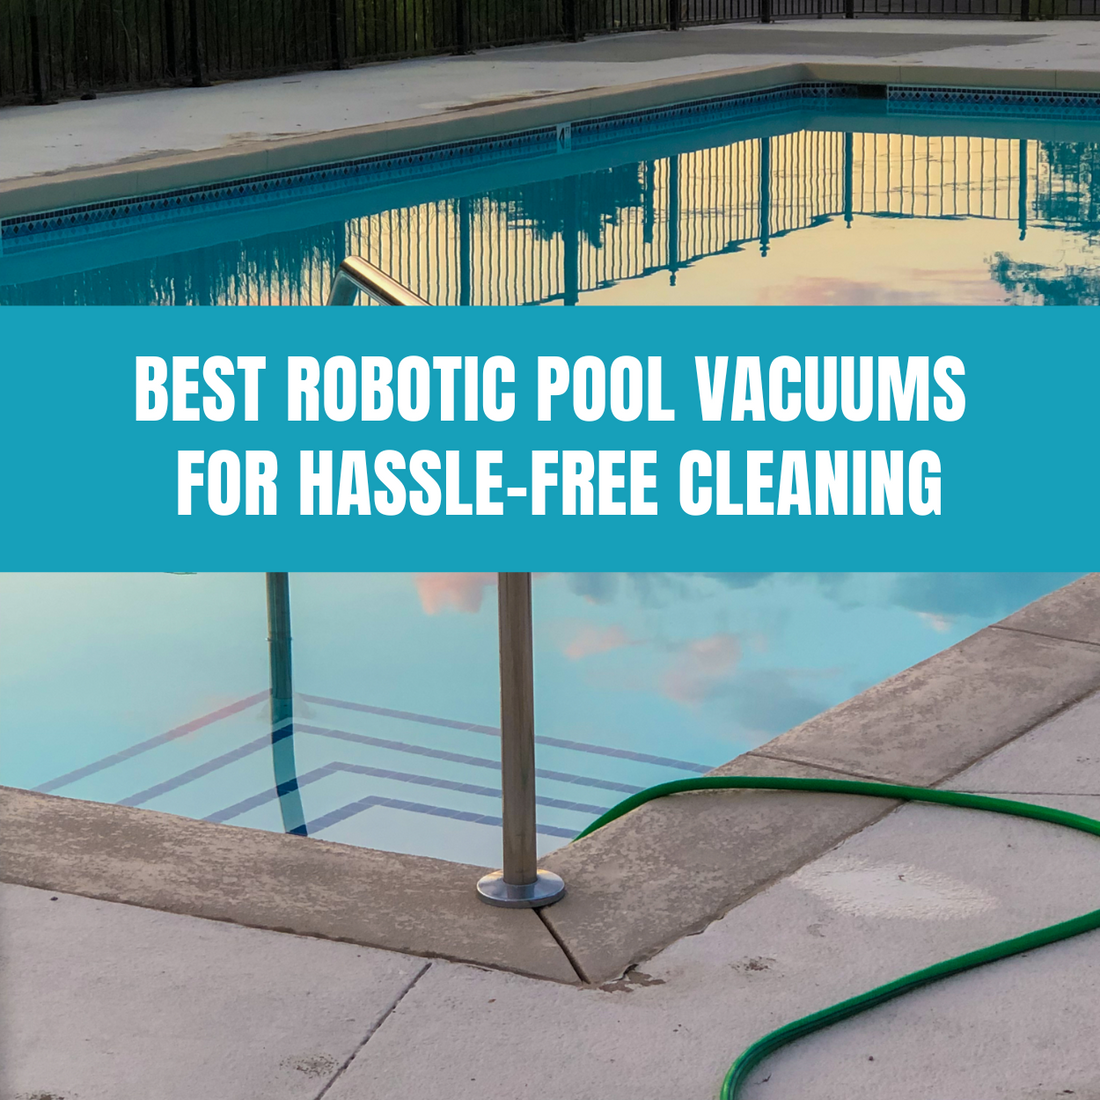 Top robotic pool vacuums for efficient and hassle-free pool cleaning